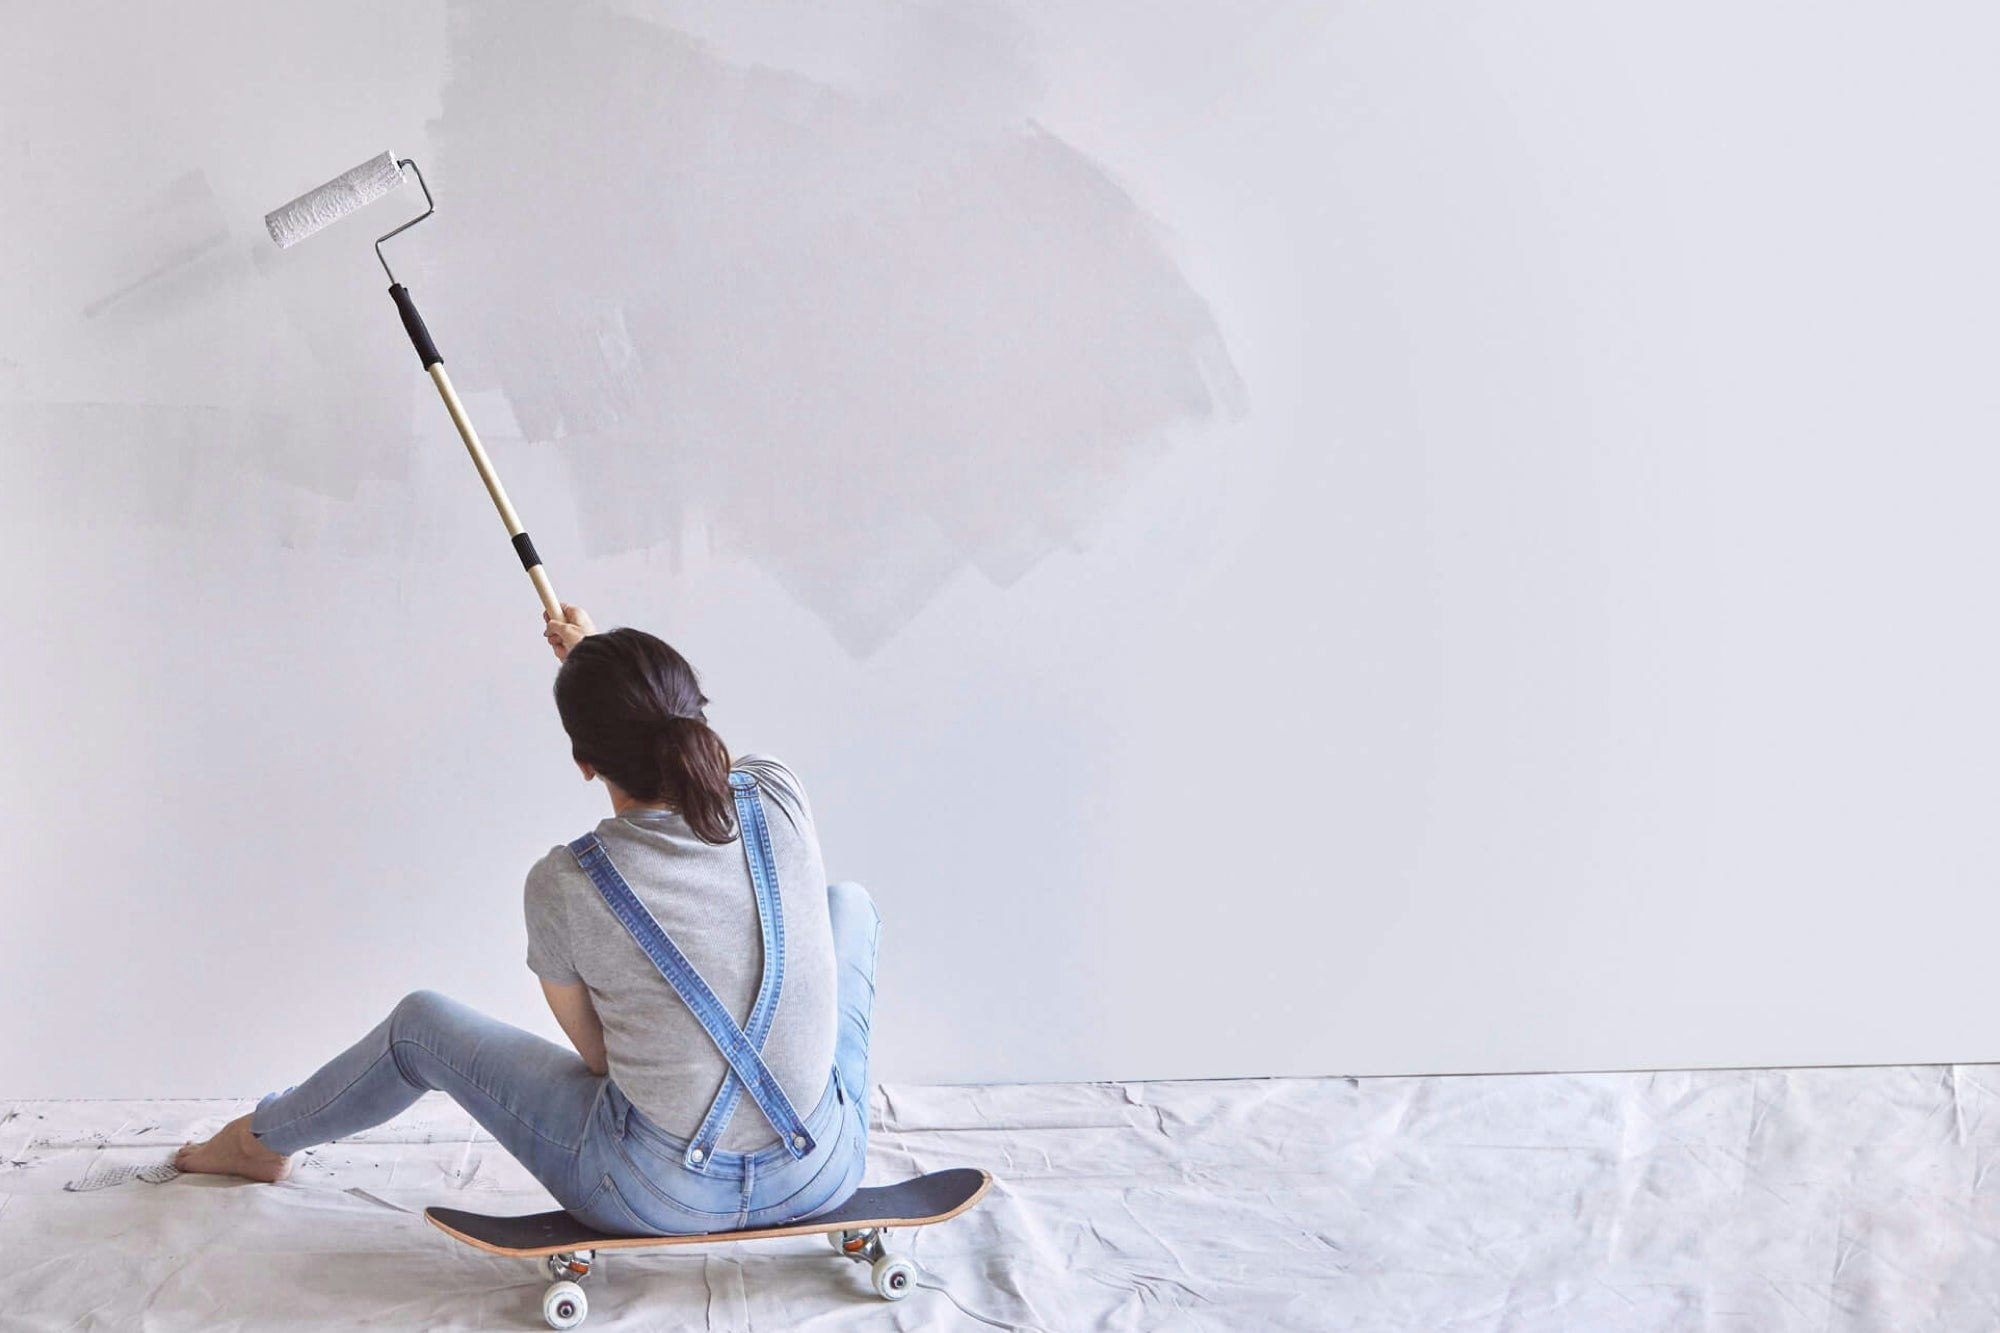 Person sitting on a skateboard and painting a wall with a paint roller with extension handle